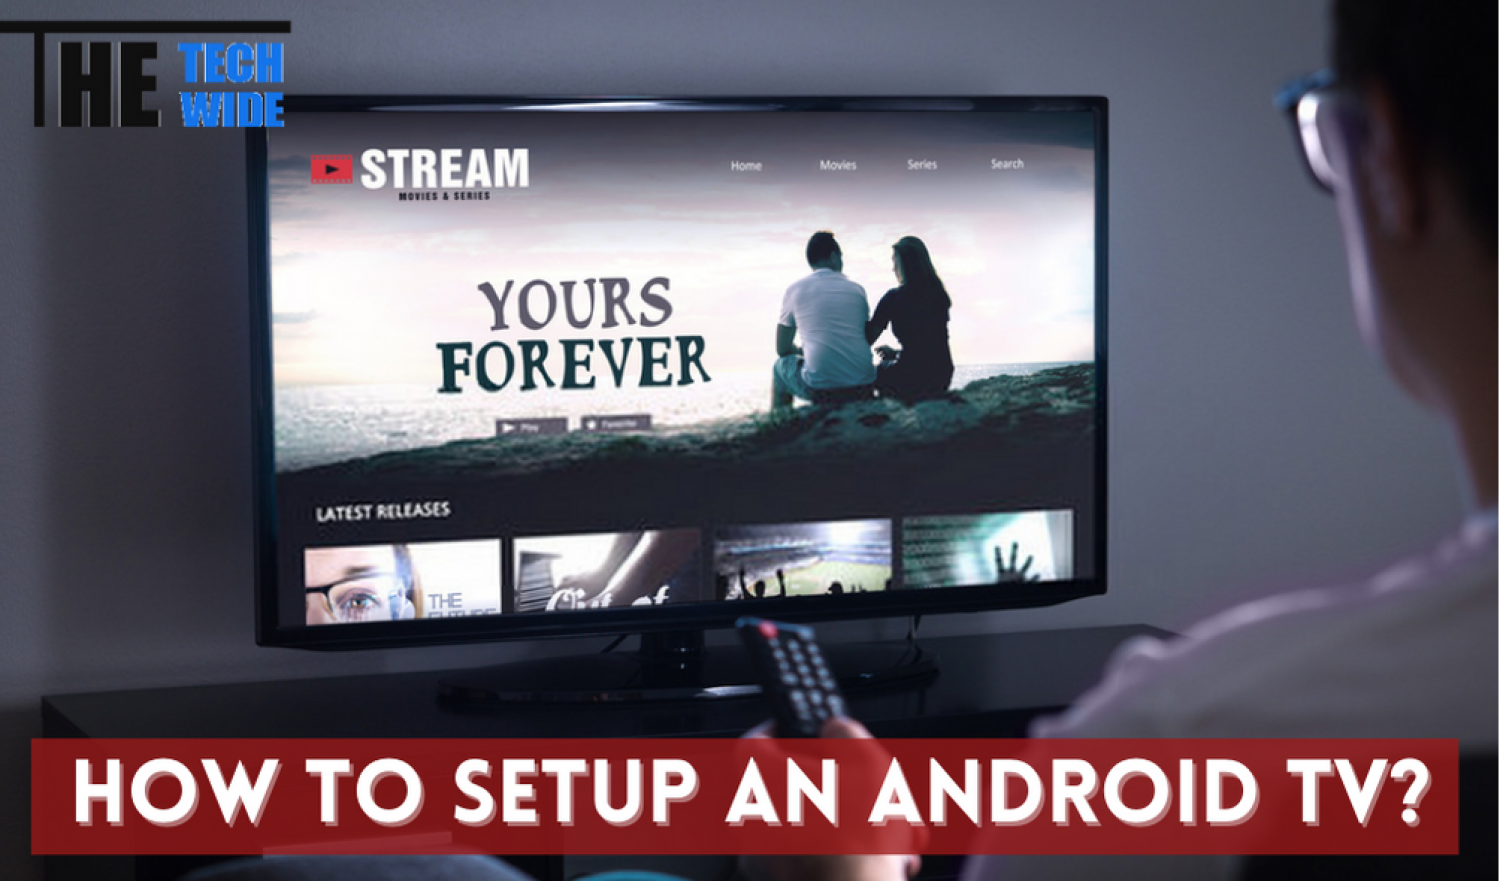 How Can I Setup an Android TV? Infographic